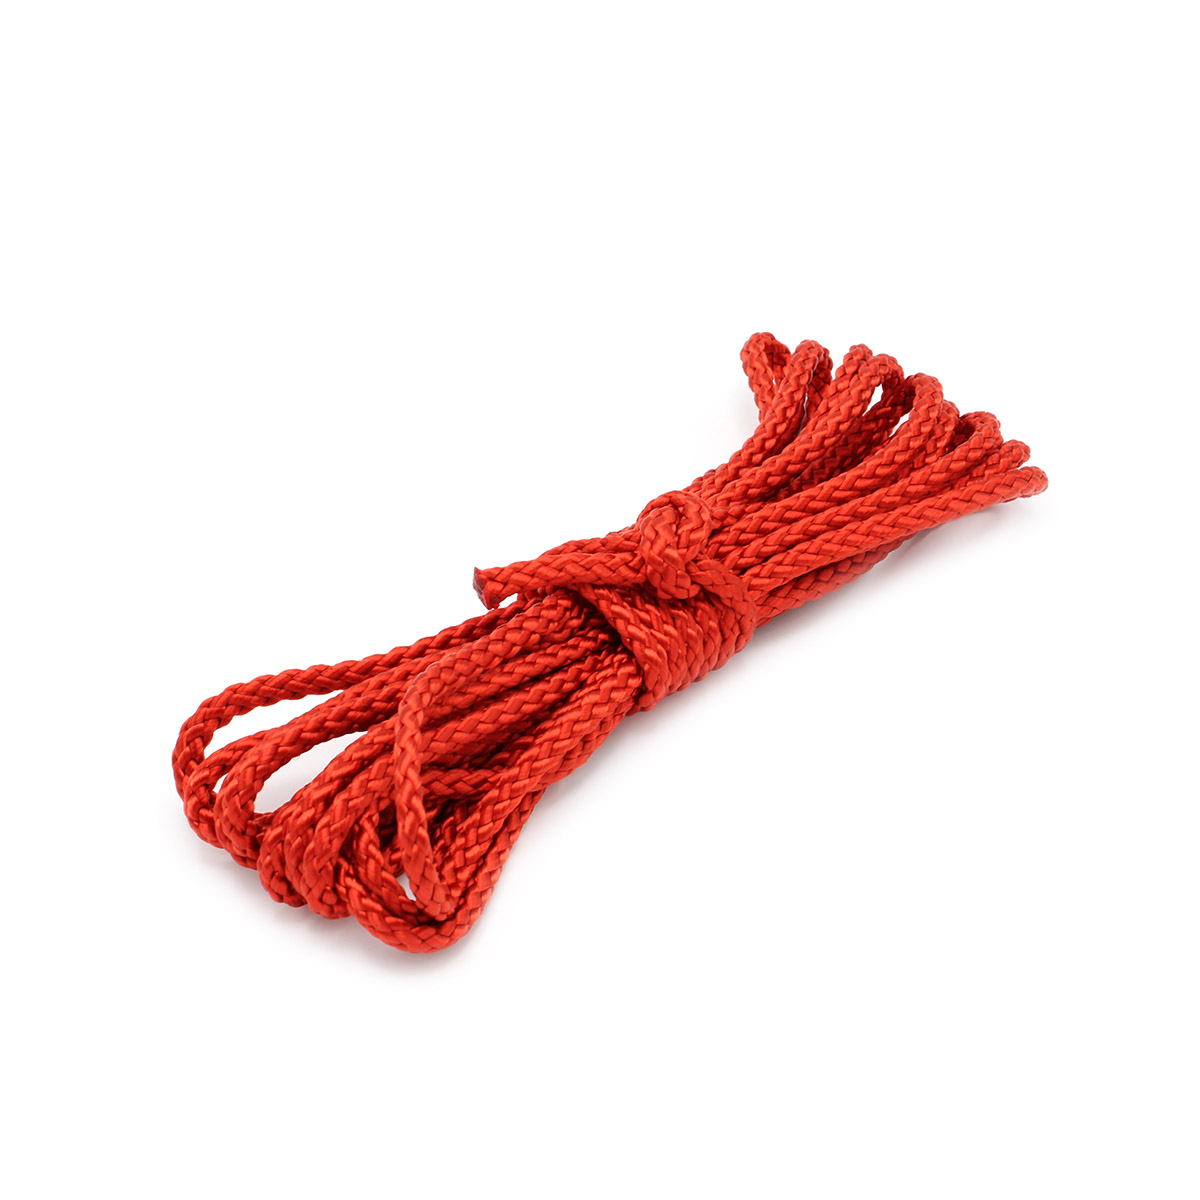 Deluxe Bondage Rope 5 M – Red